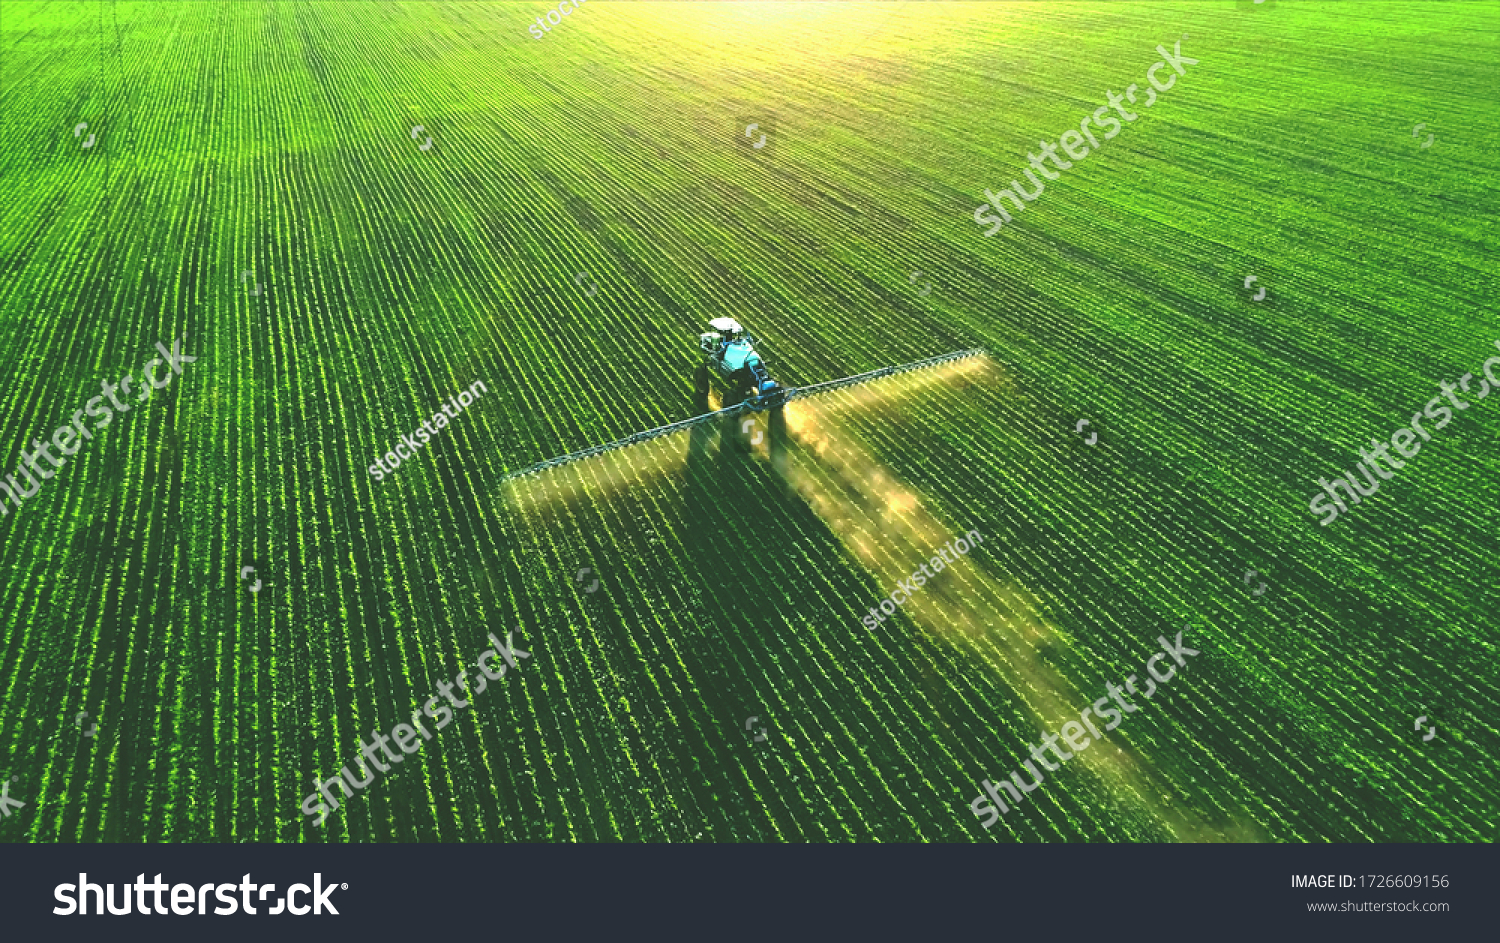 Tractor spray fertilizer on green field drone high angle view, agriculture background concept. #1726609156